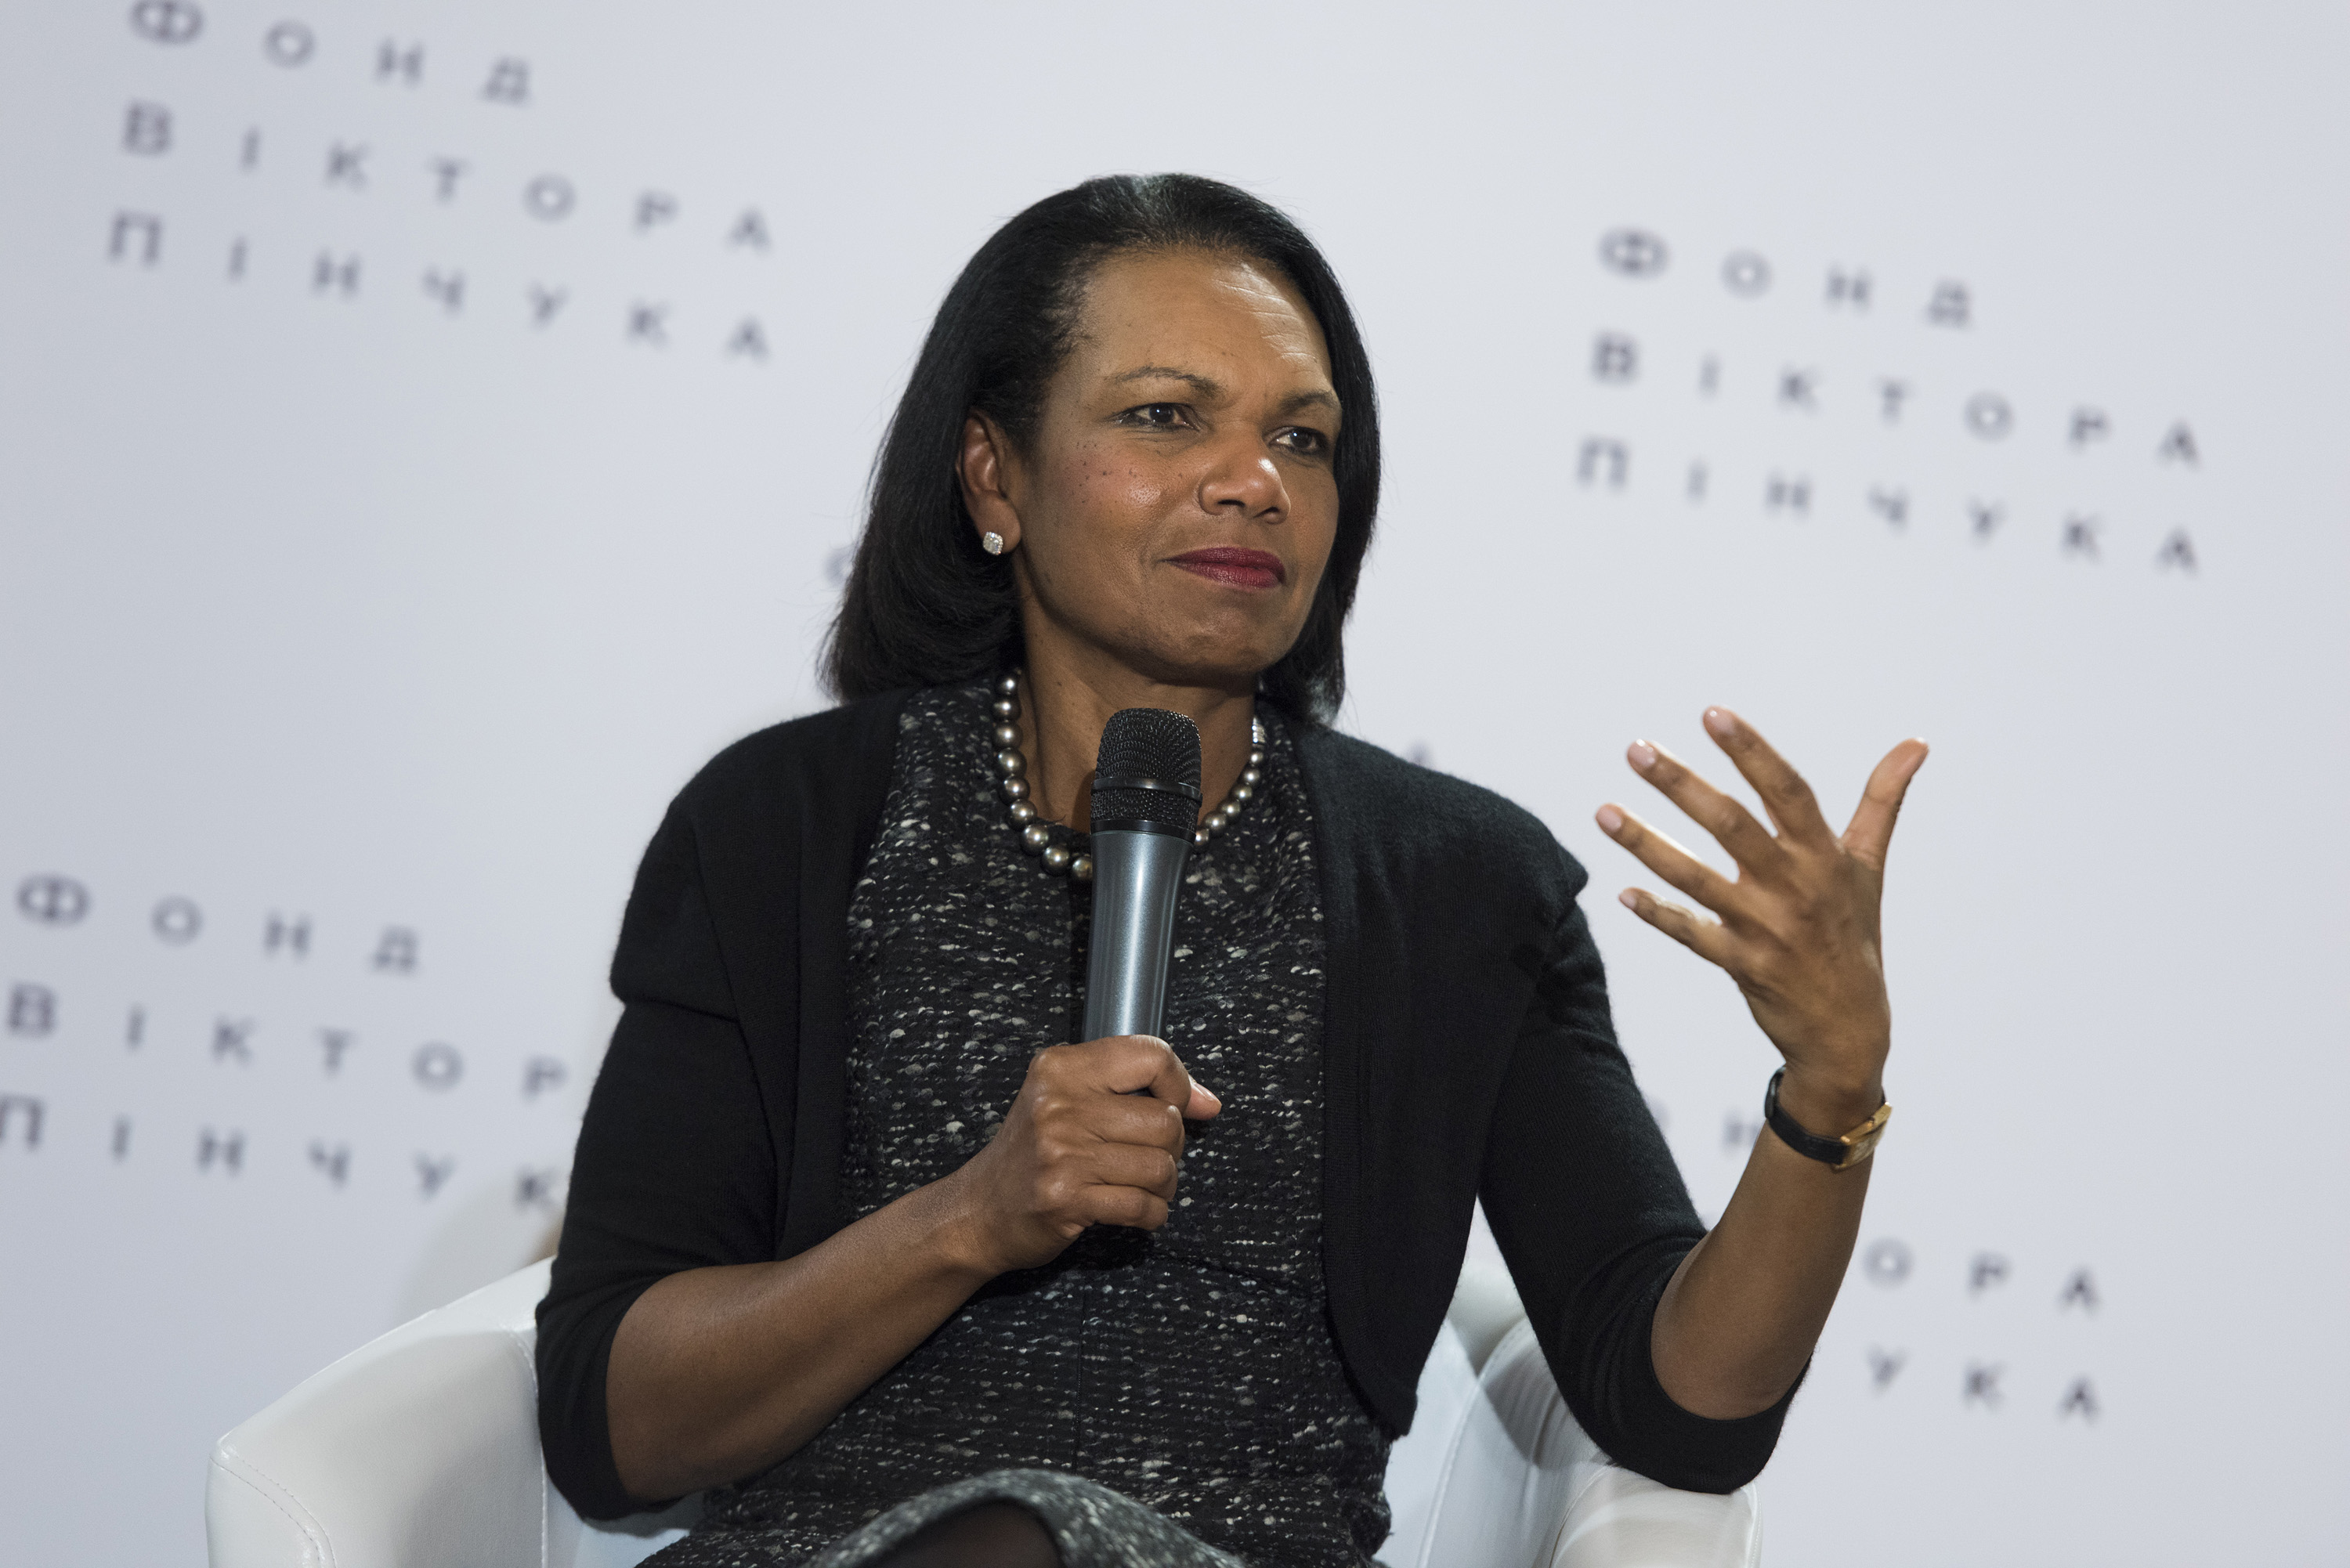 Public lecture by Condoleezza Rice on Challenges in an Ever-Changing World